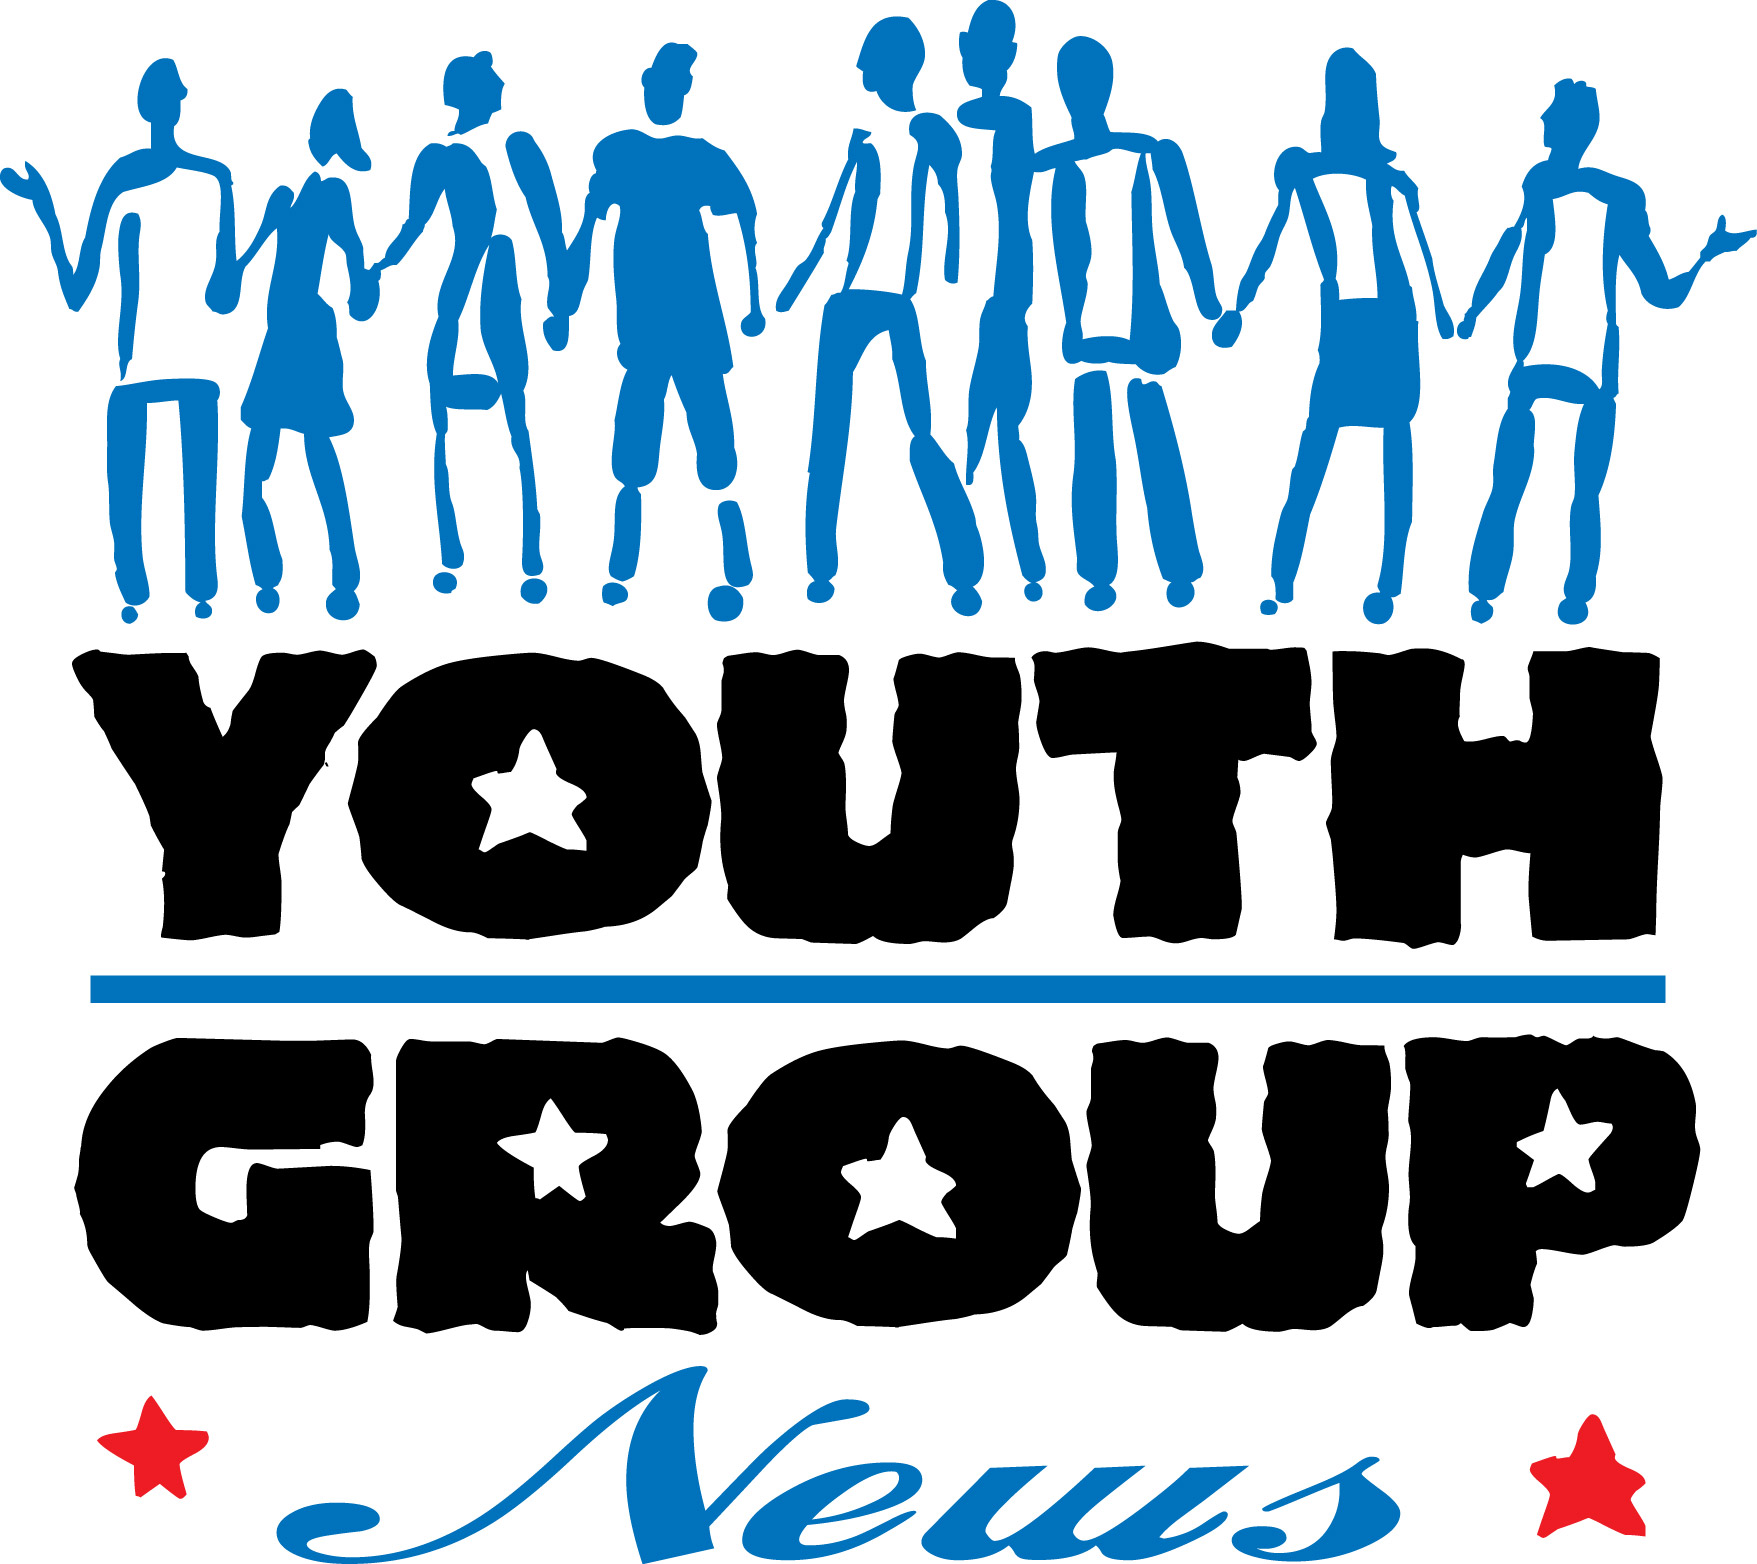 Youth Groups